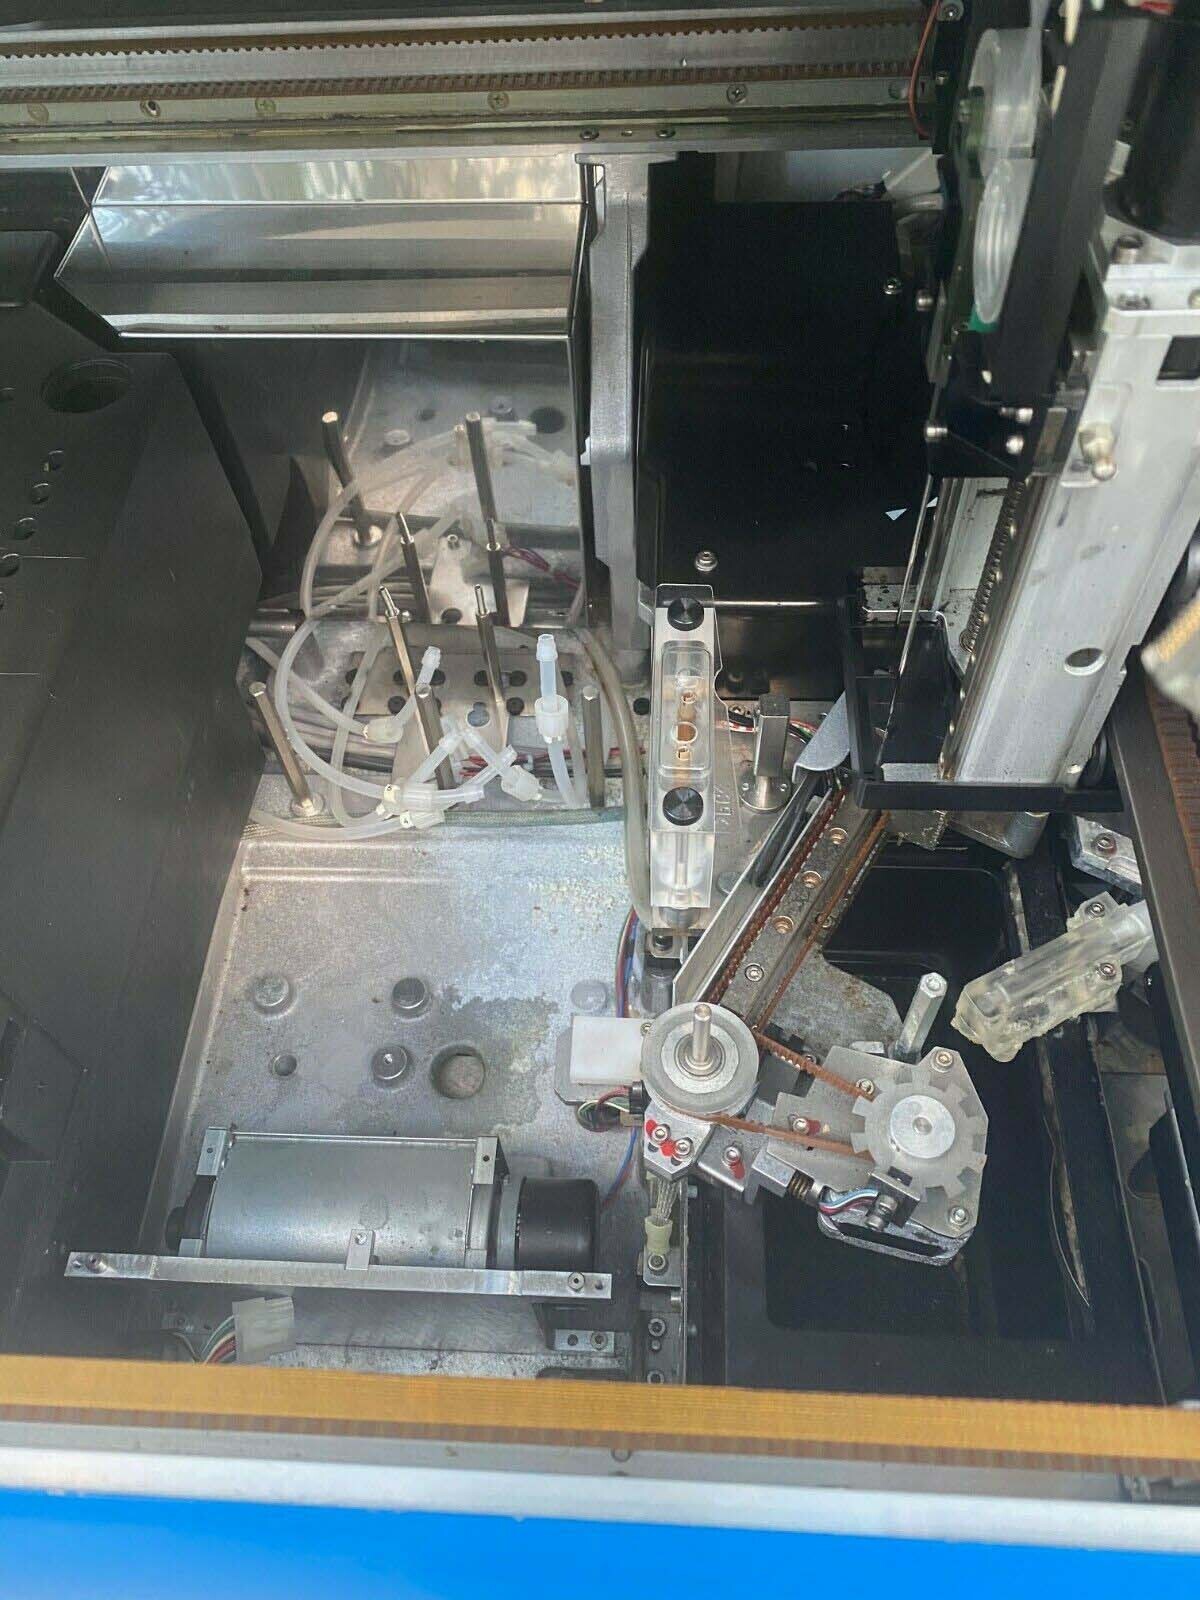 ROCHE Cobas Integra 400 Plus Lab Equipment used for sale price #9353022 ...